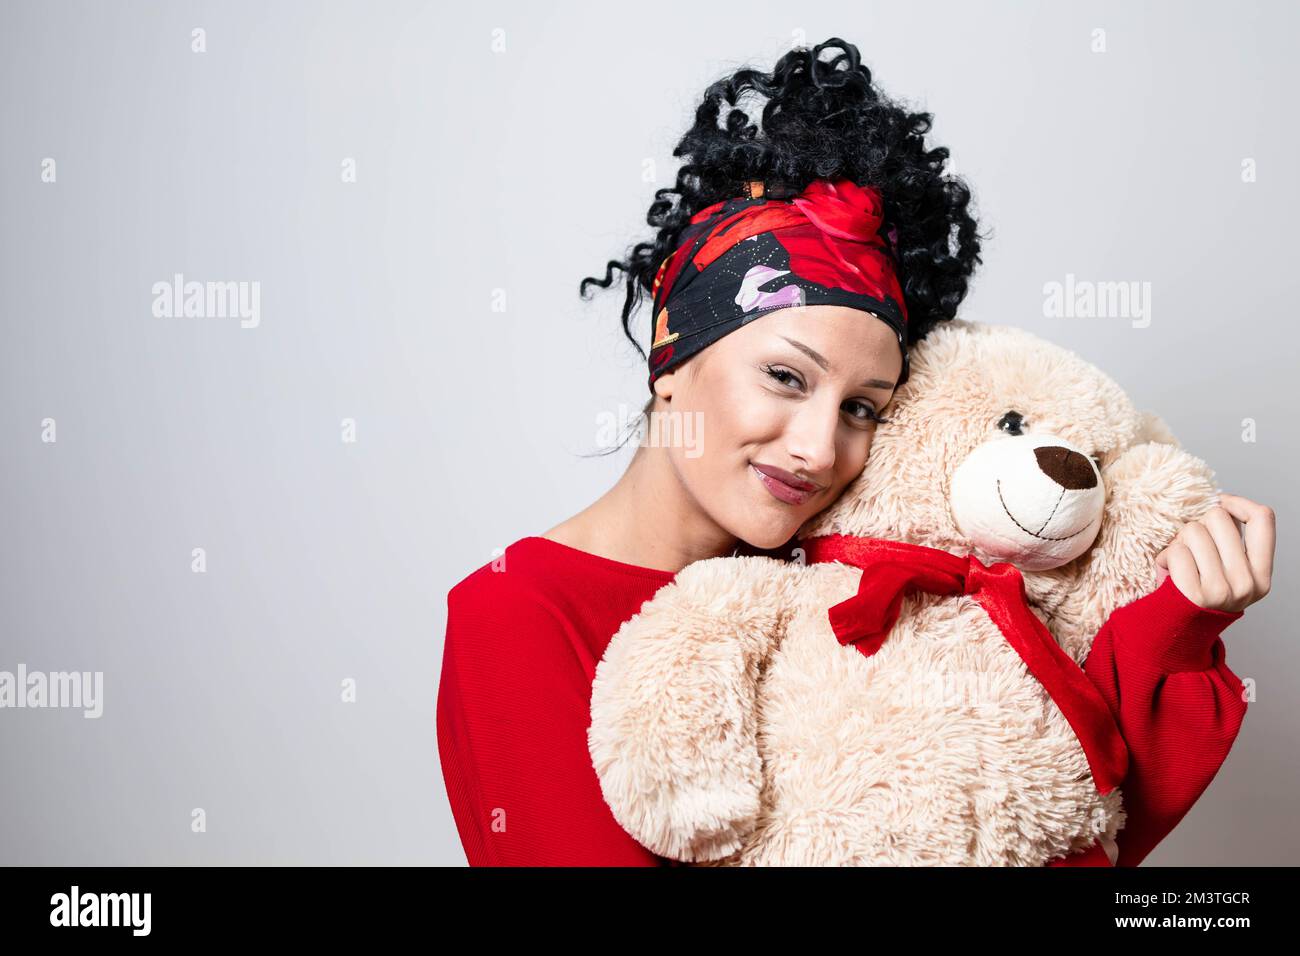 Beautiful curly young girl with bandana hairstyle holding teddy bear Stock Photo